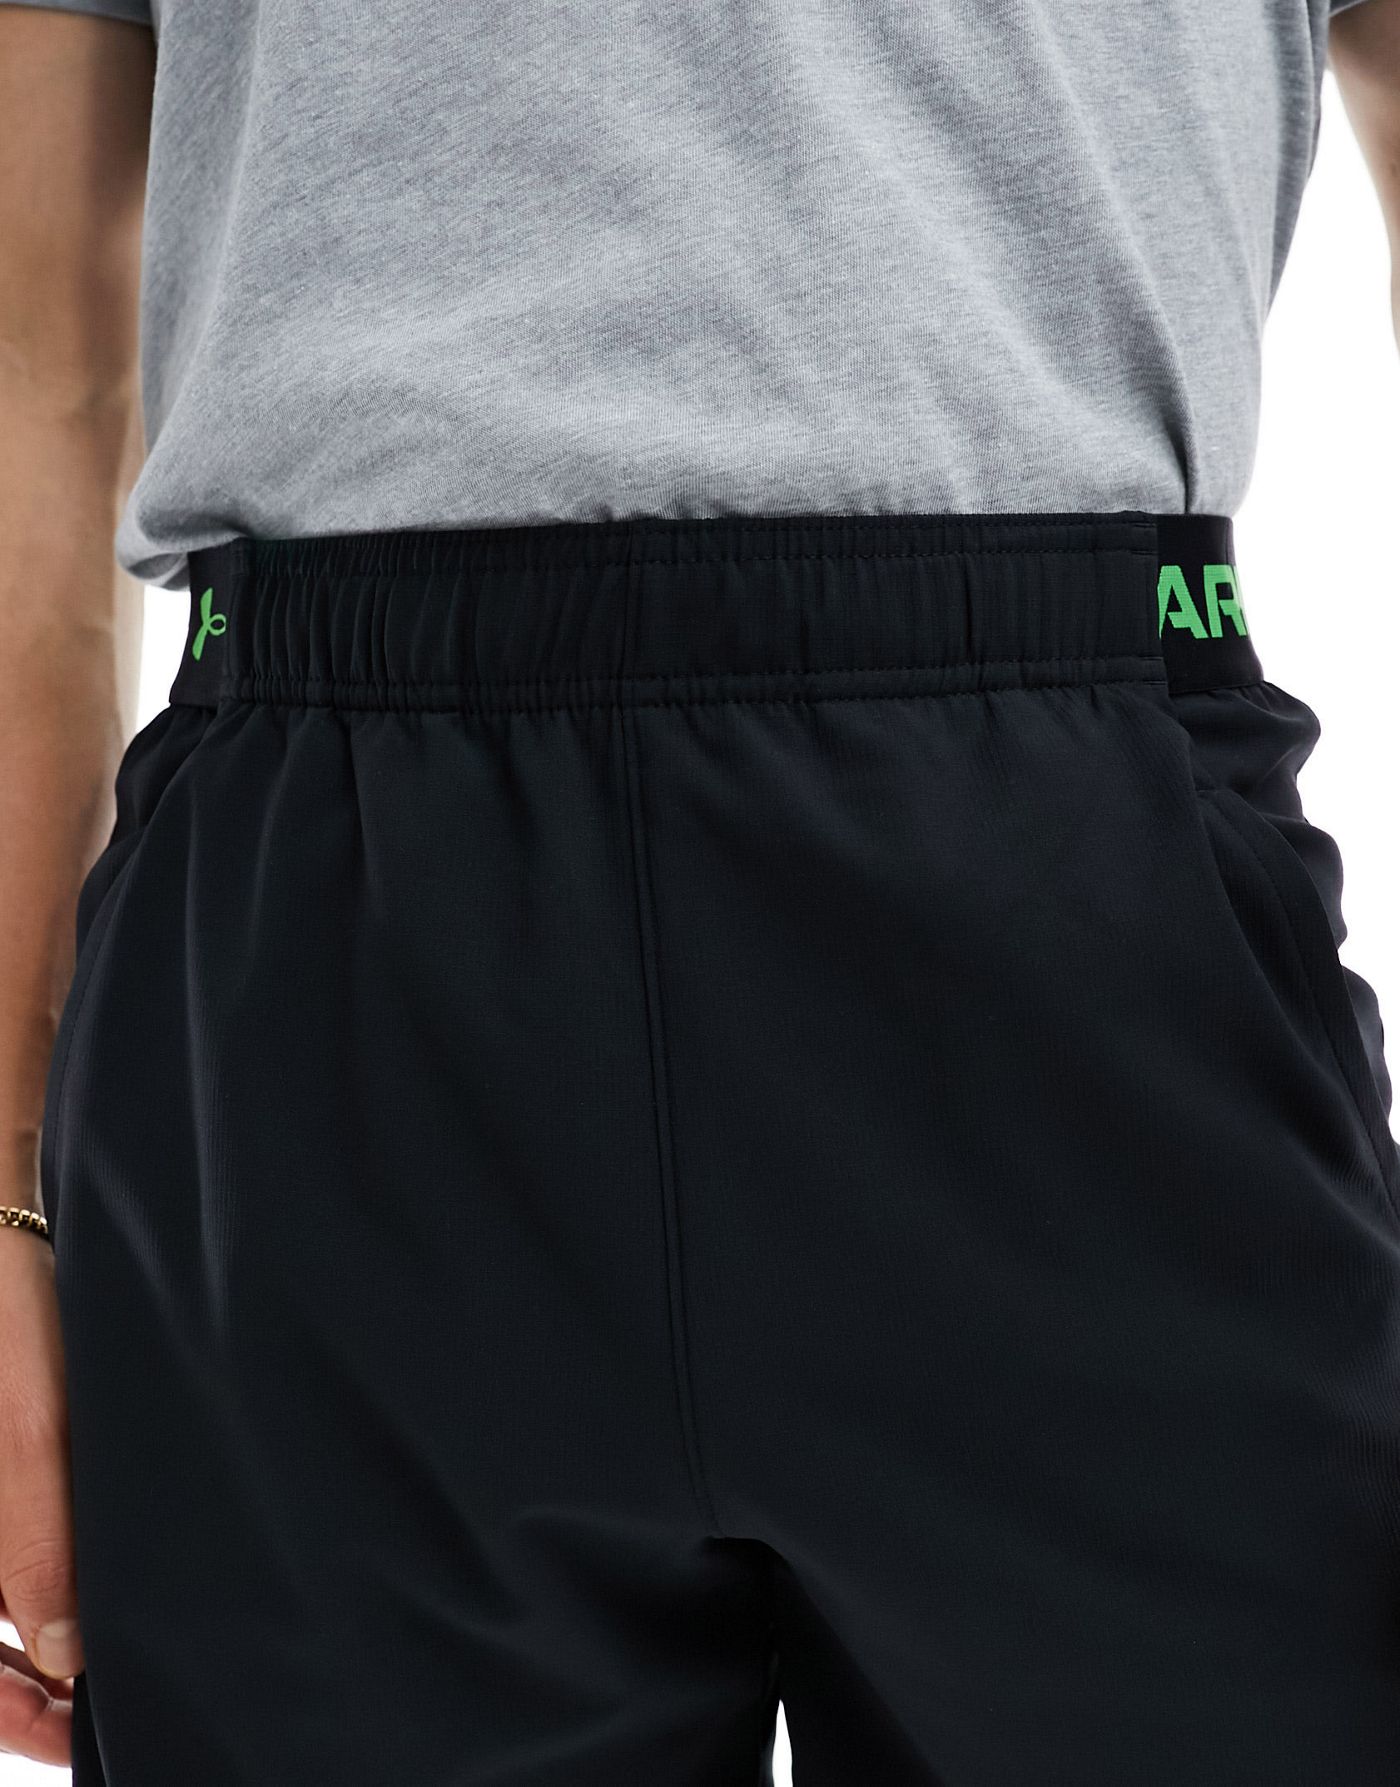 Under Armour Vanish woven 6 inch shorts in black and green